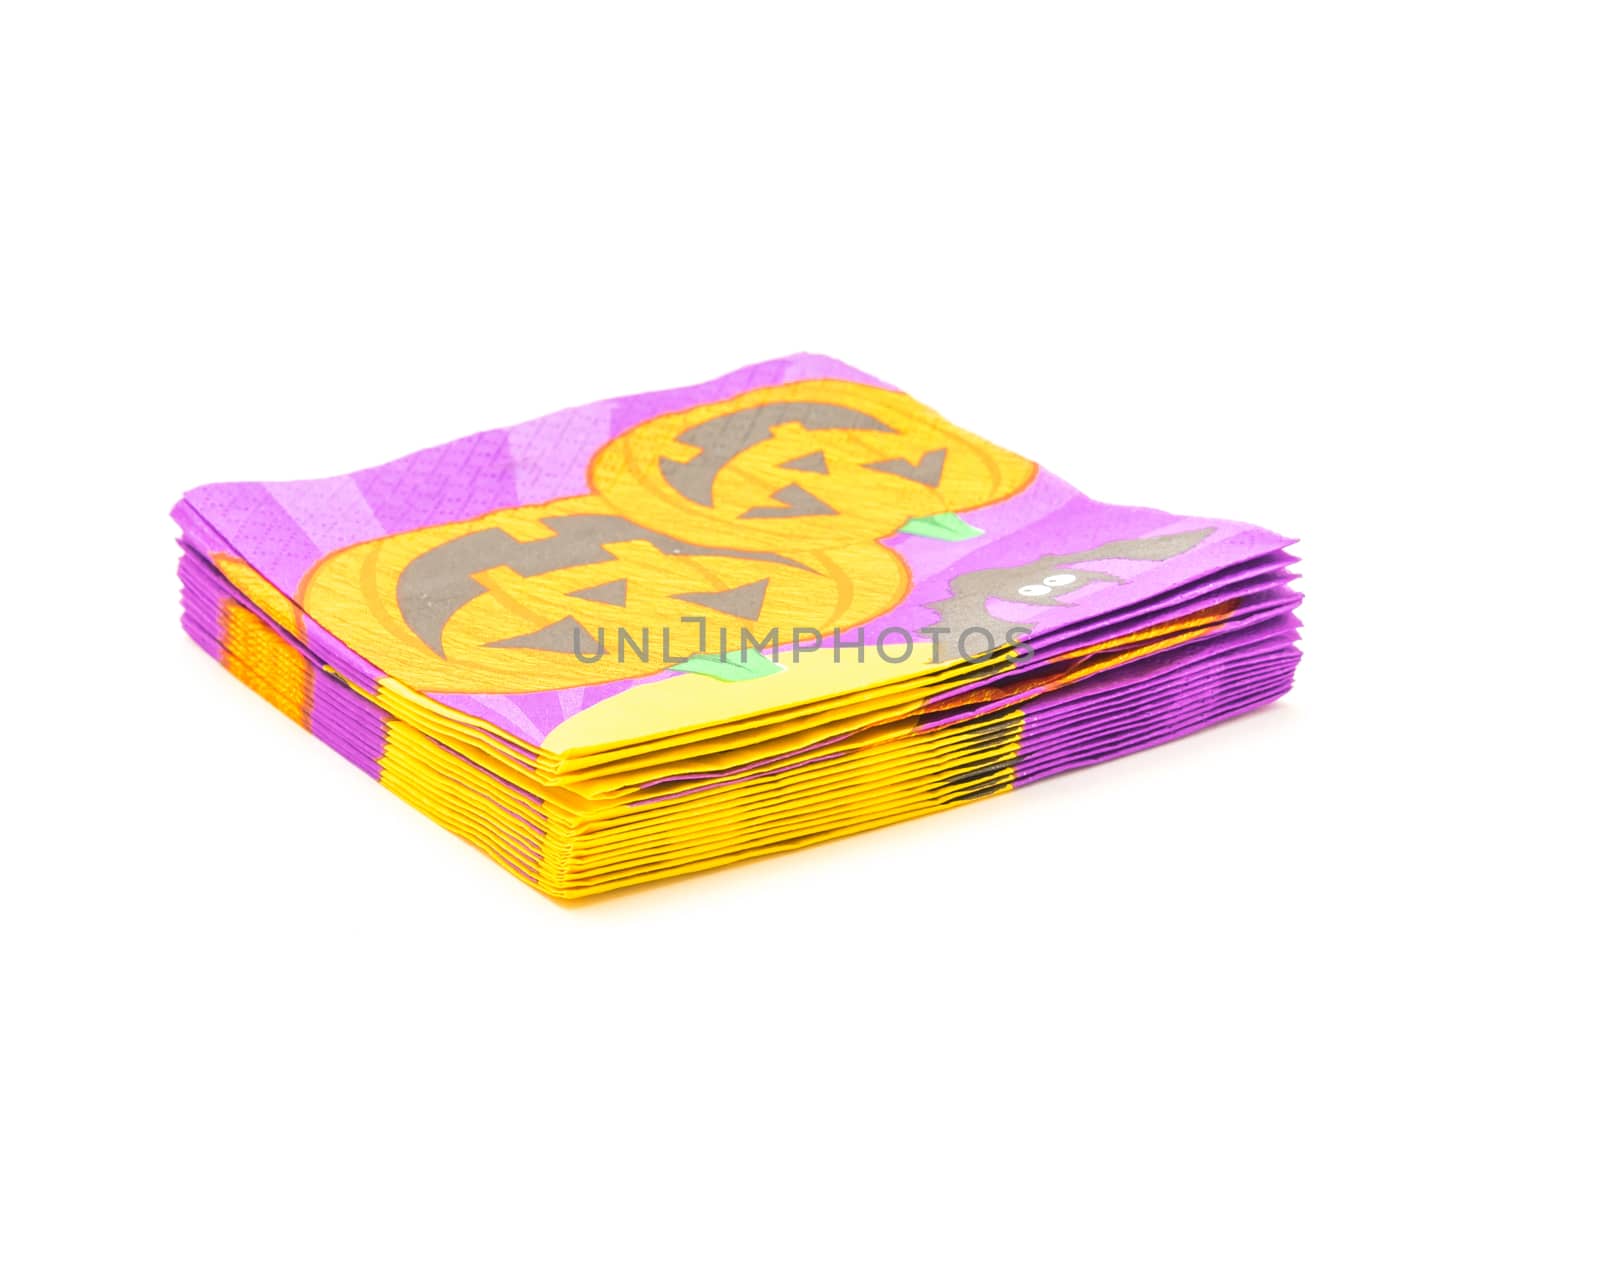 Stack of friendly Halloween napkins isolated on white background. Festive party tissue piles display pumpkins, bats, jack-o-lantern